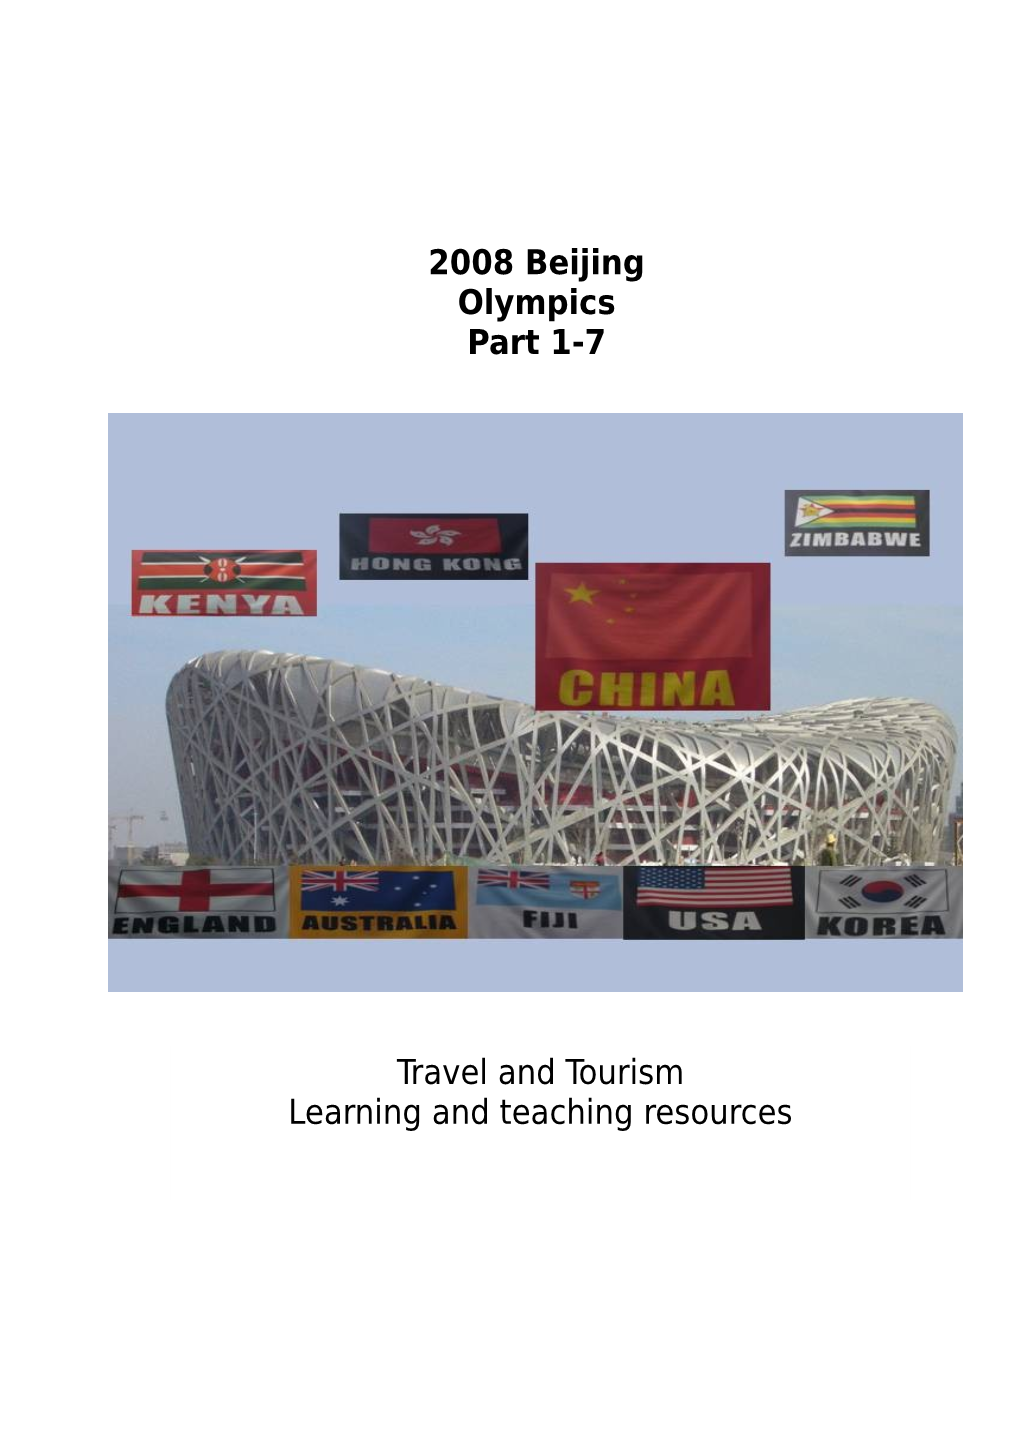 Part 1: Initiating Learning Incentive (An Overview Of Beijing)